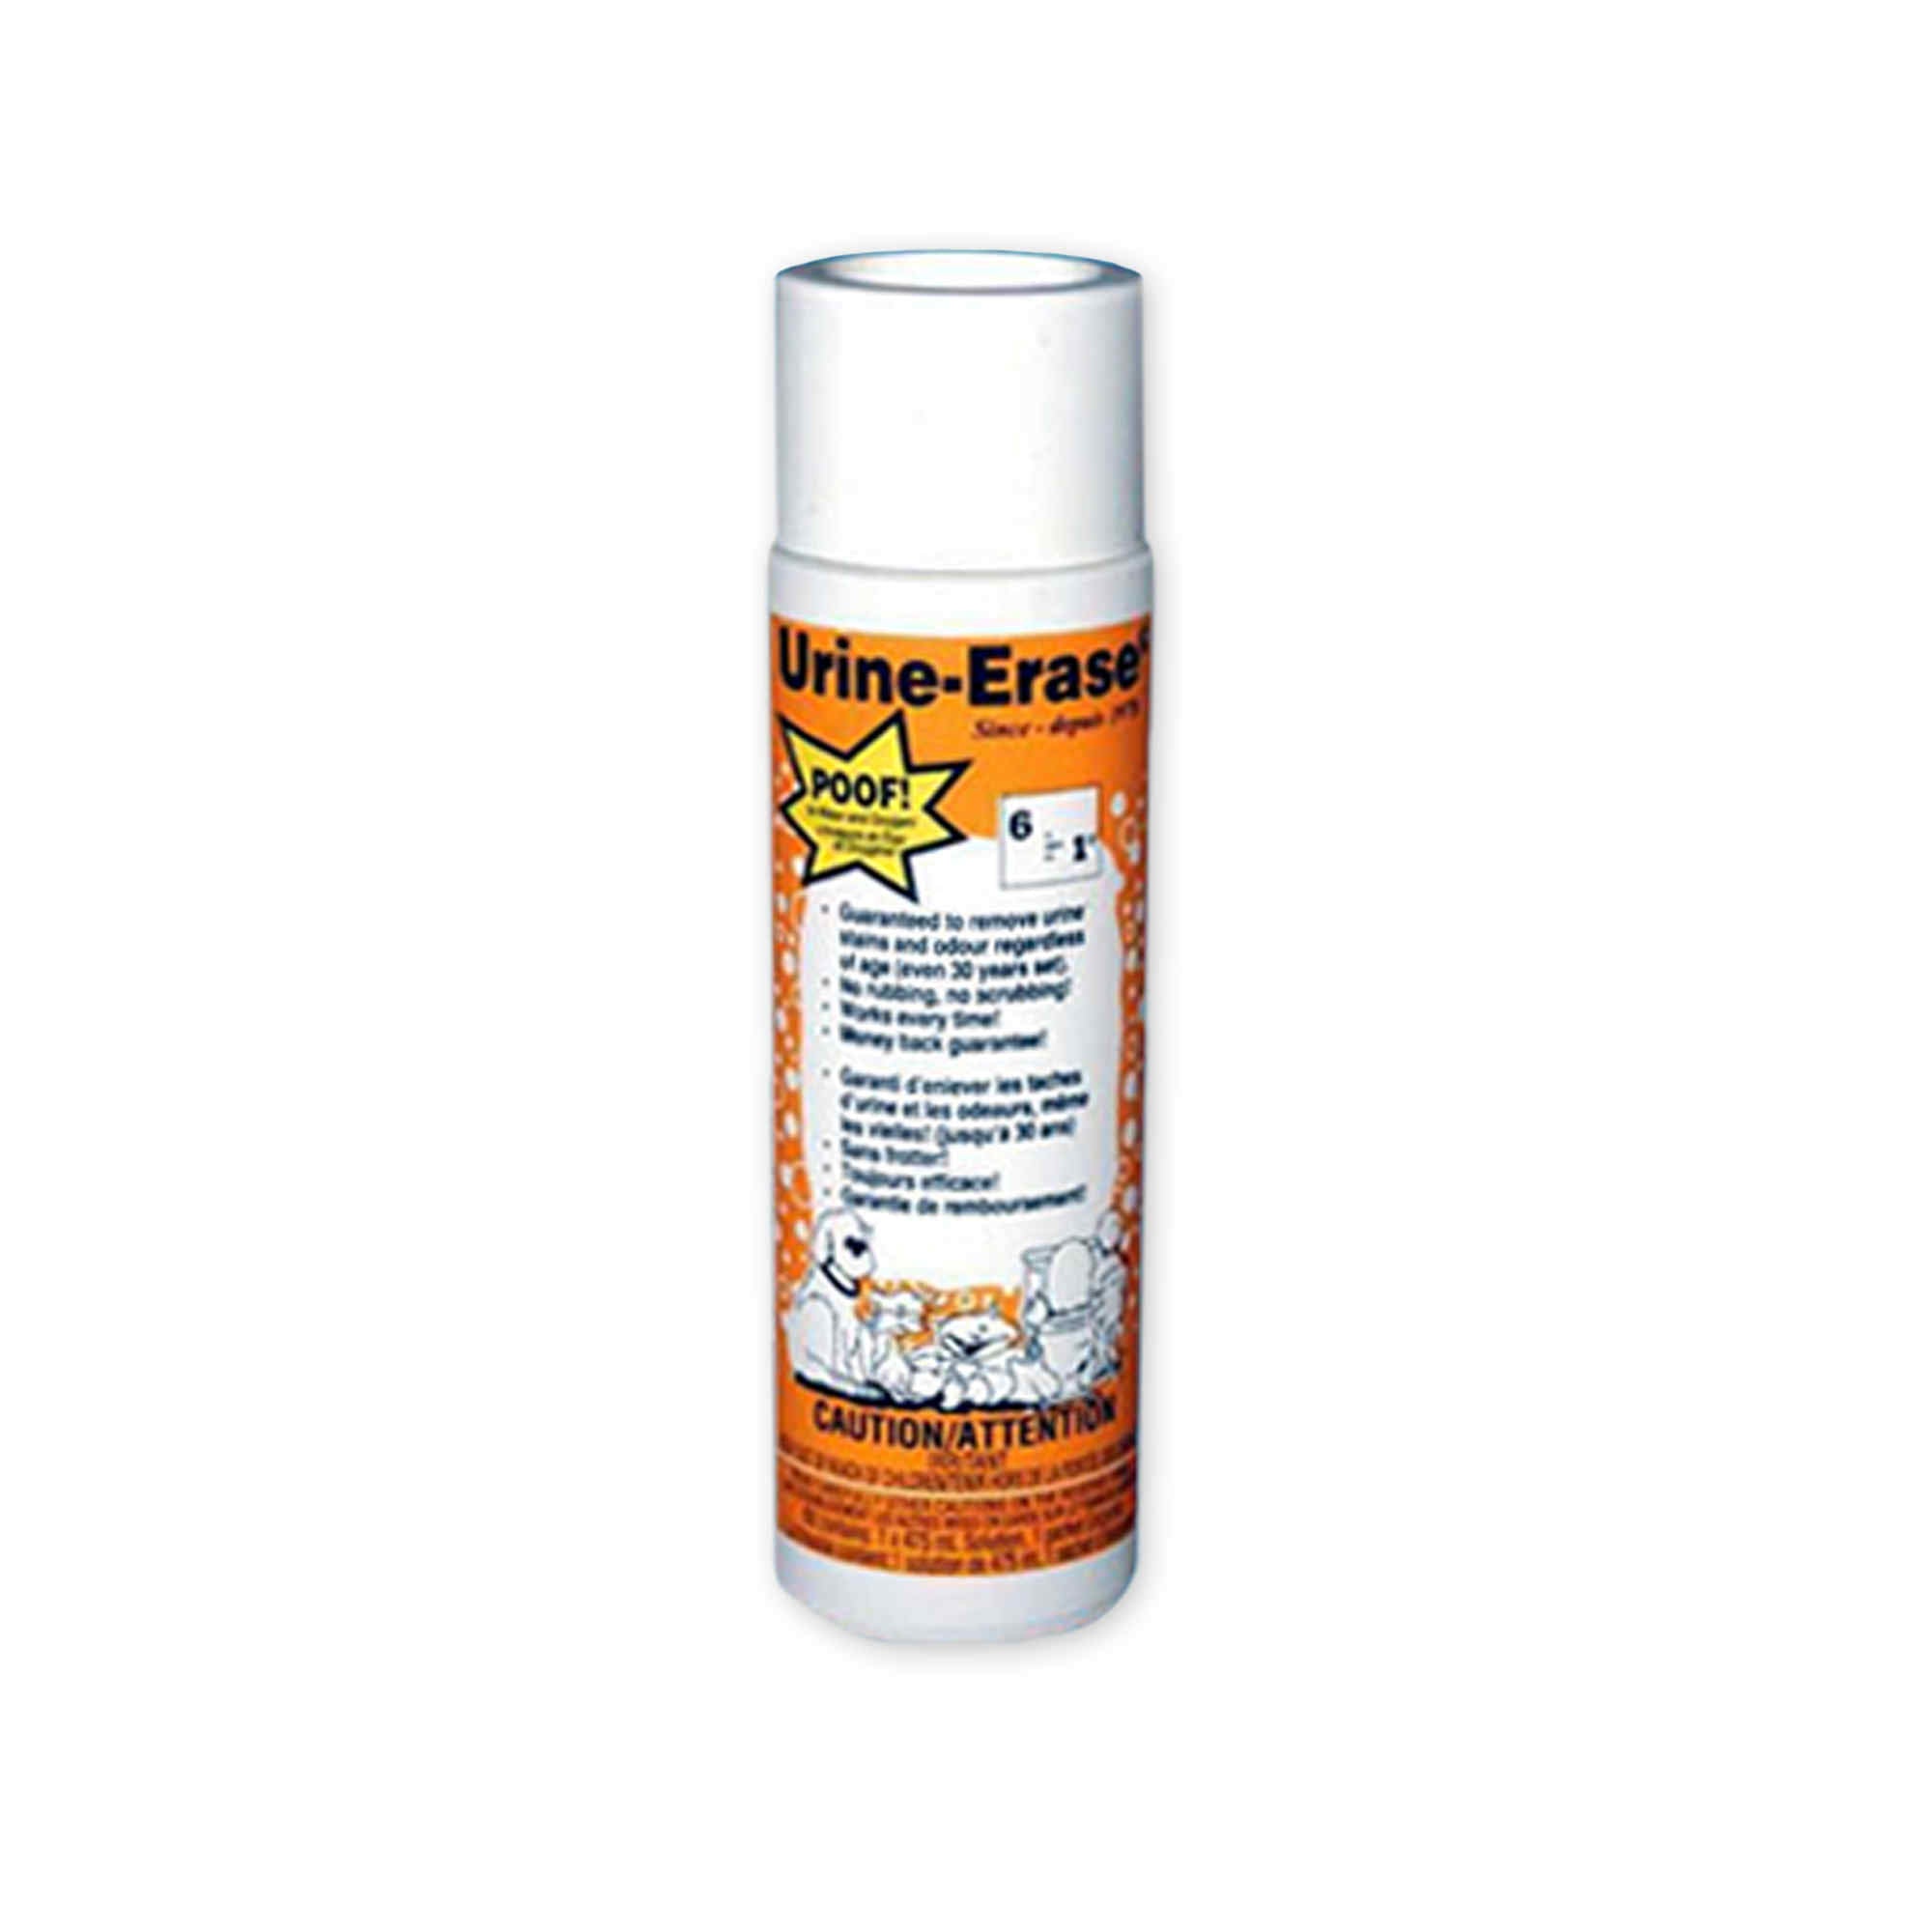 Stain Removers-Urine-Erase Stain and Odor Remover